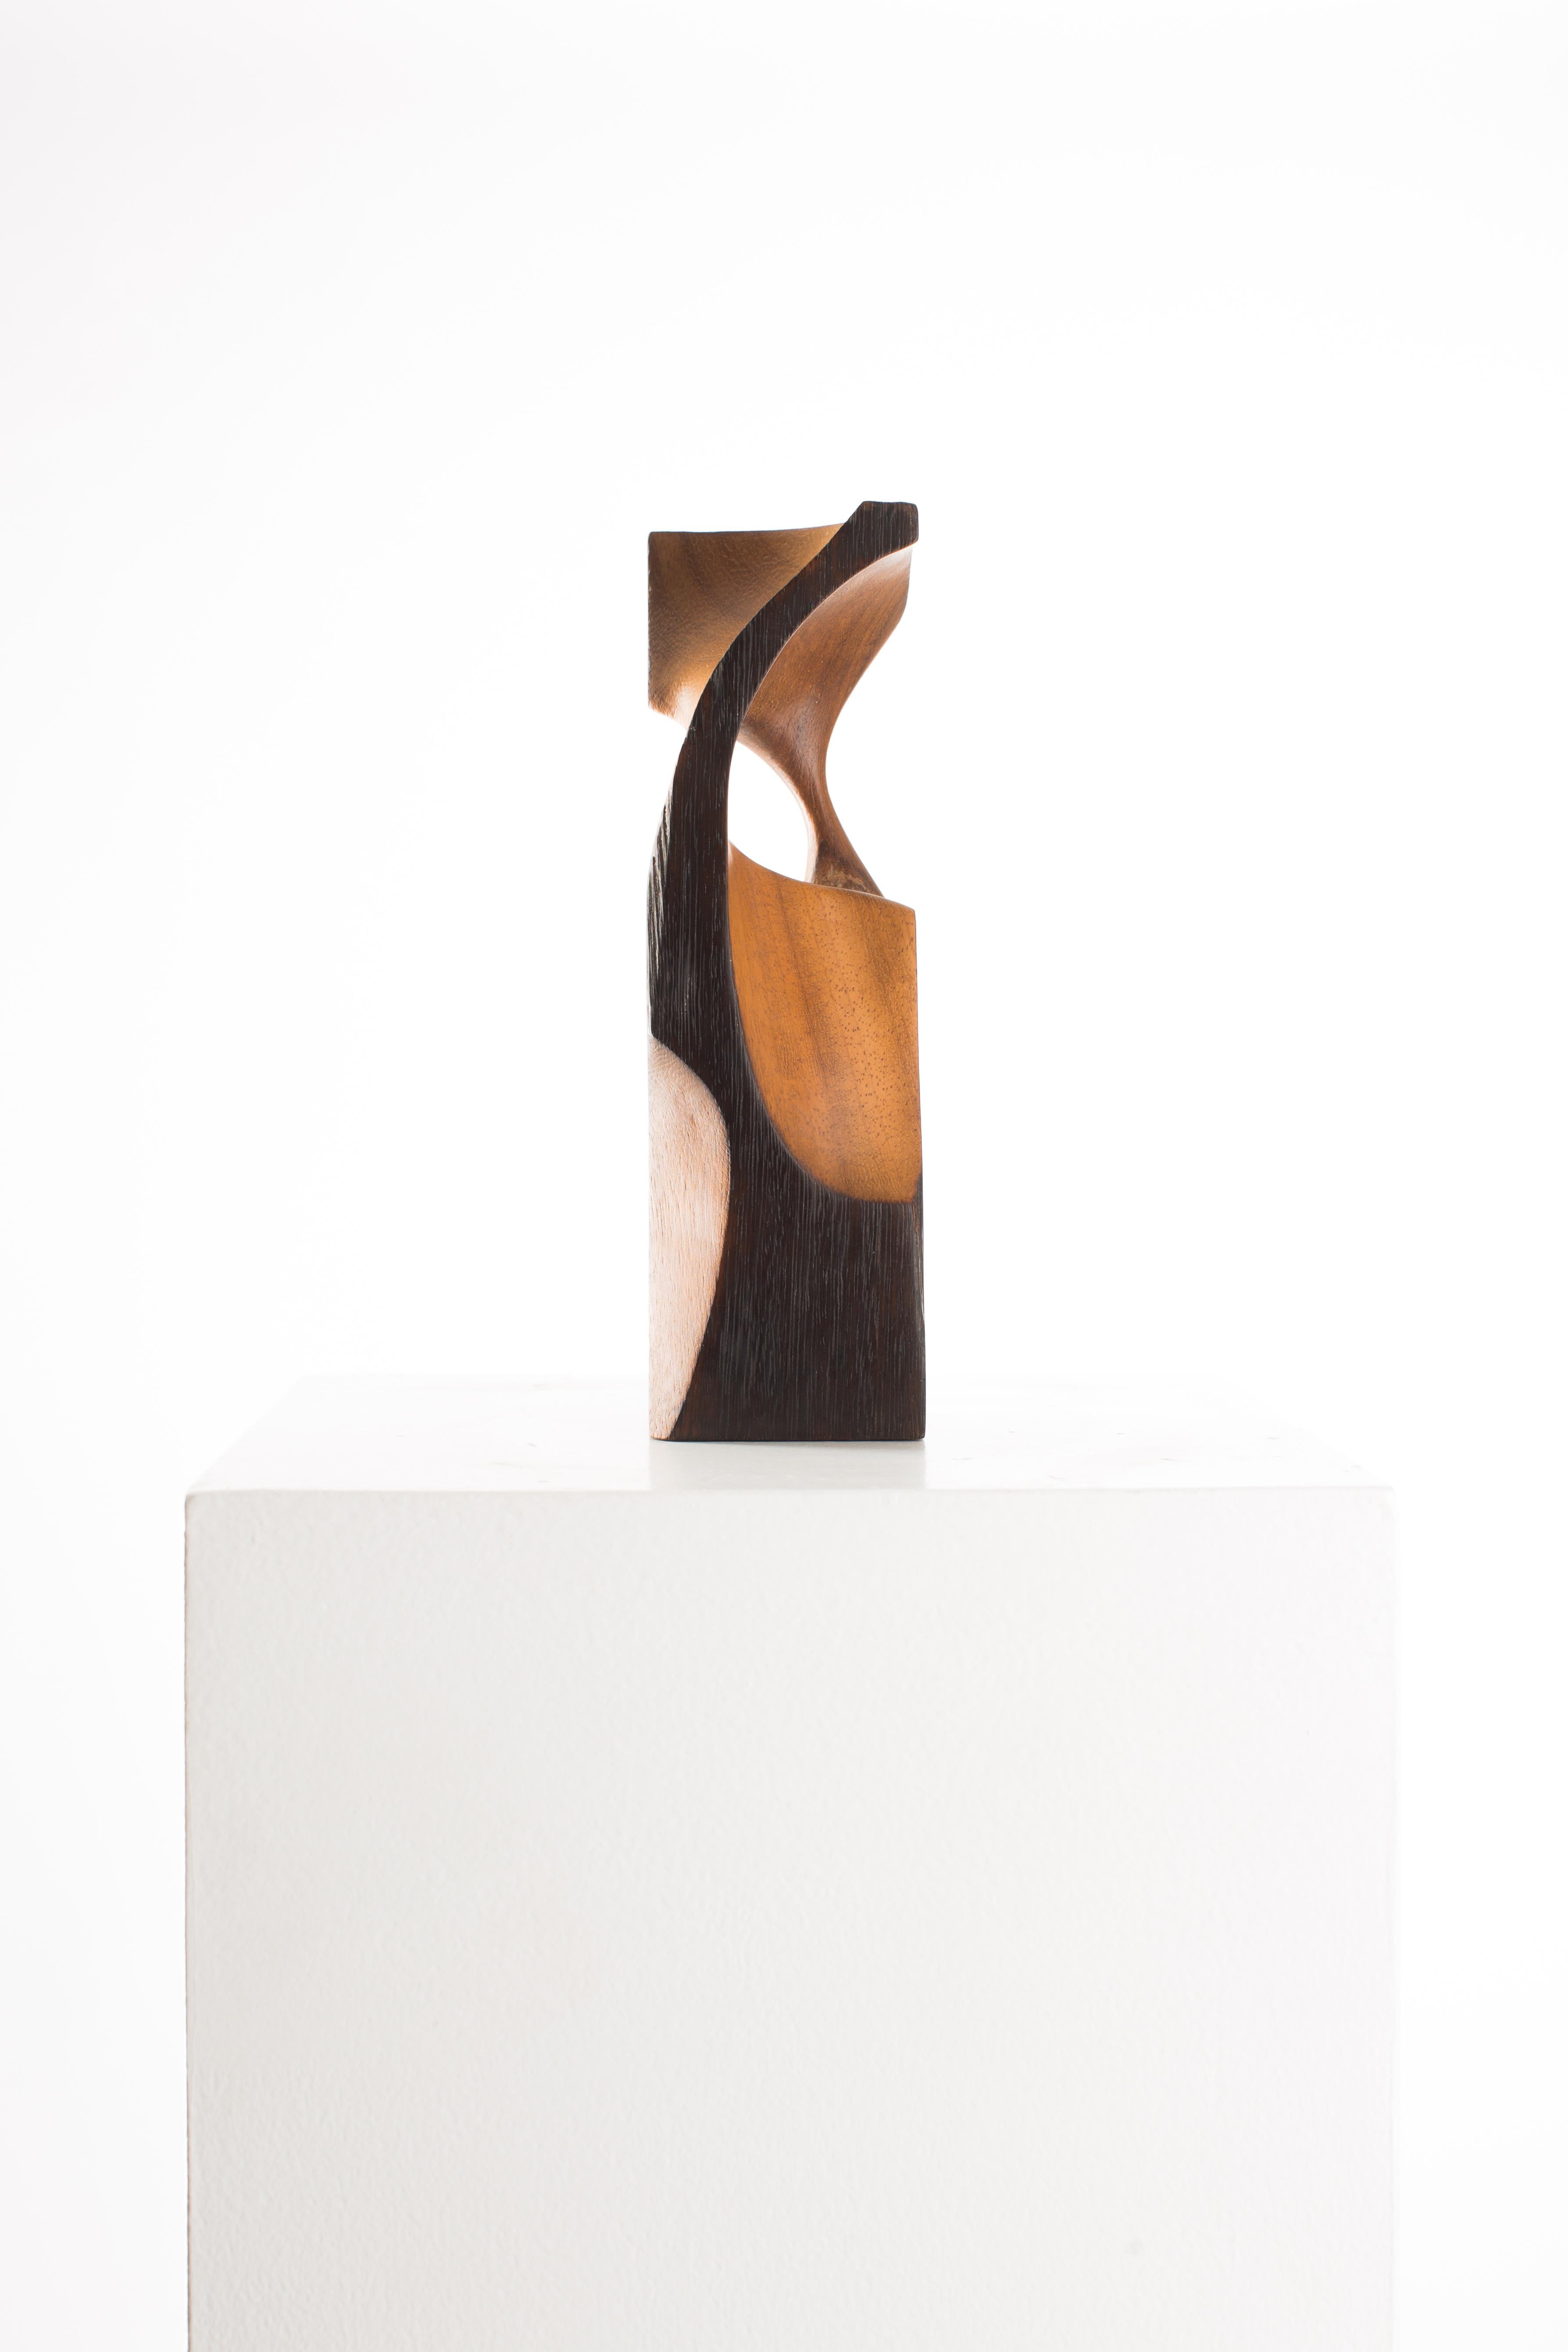 Black, Raw, Satin, Wood, Abstract, Contemporary, Modern, Sculpture For Sale 3